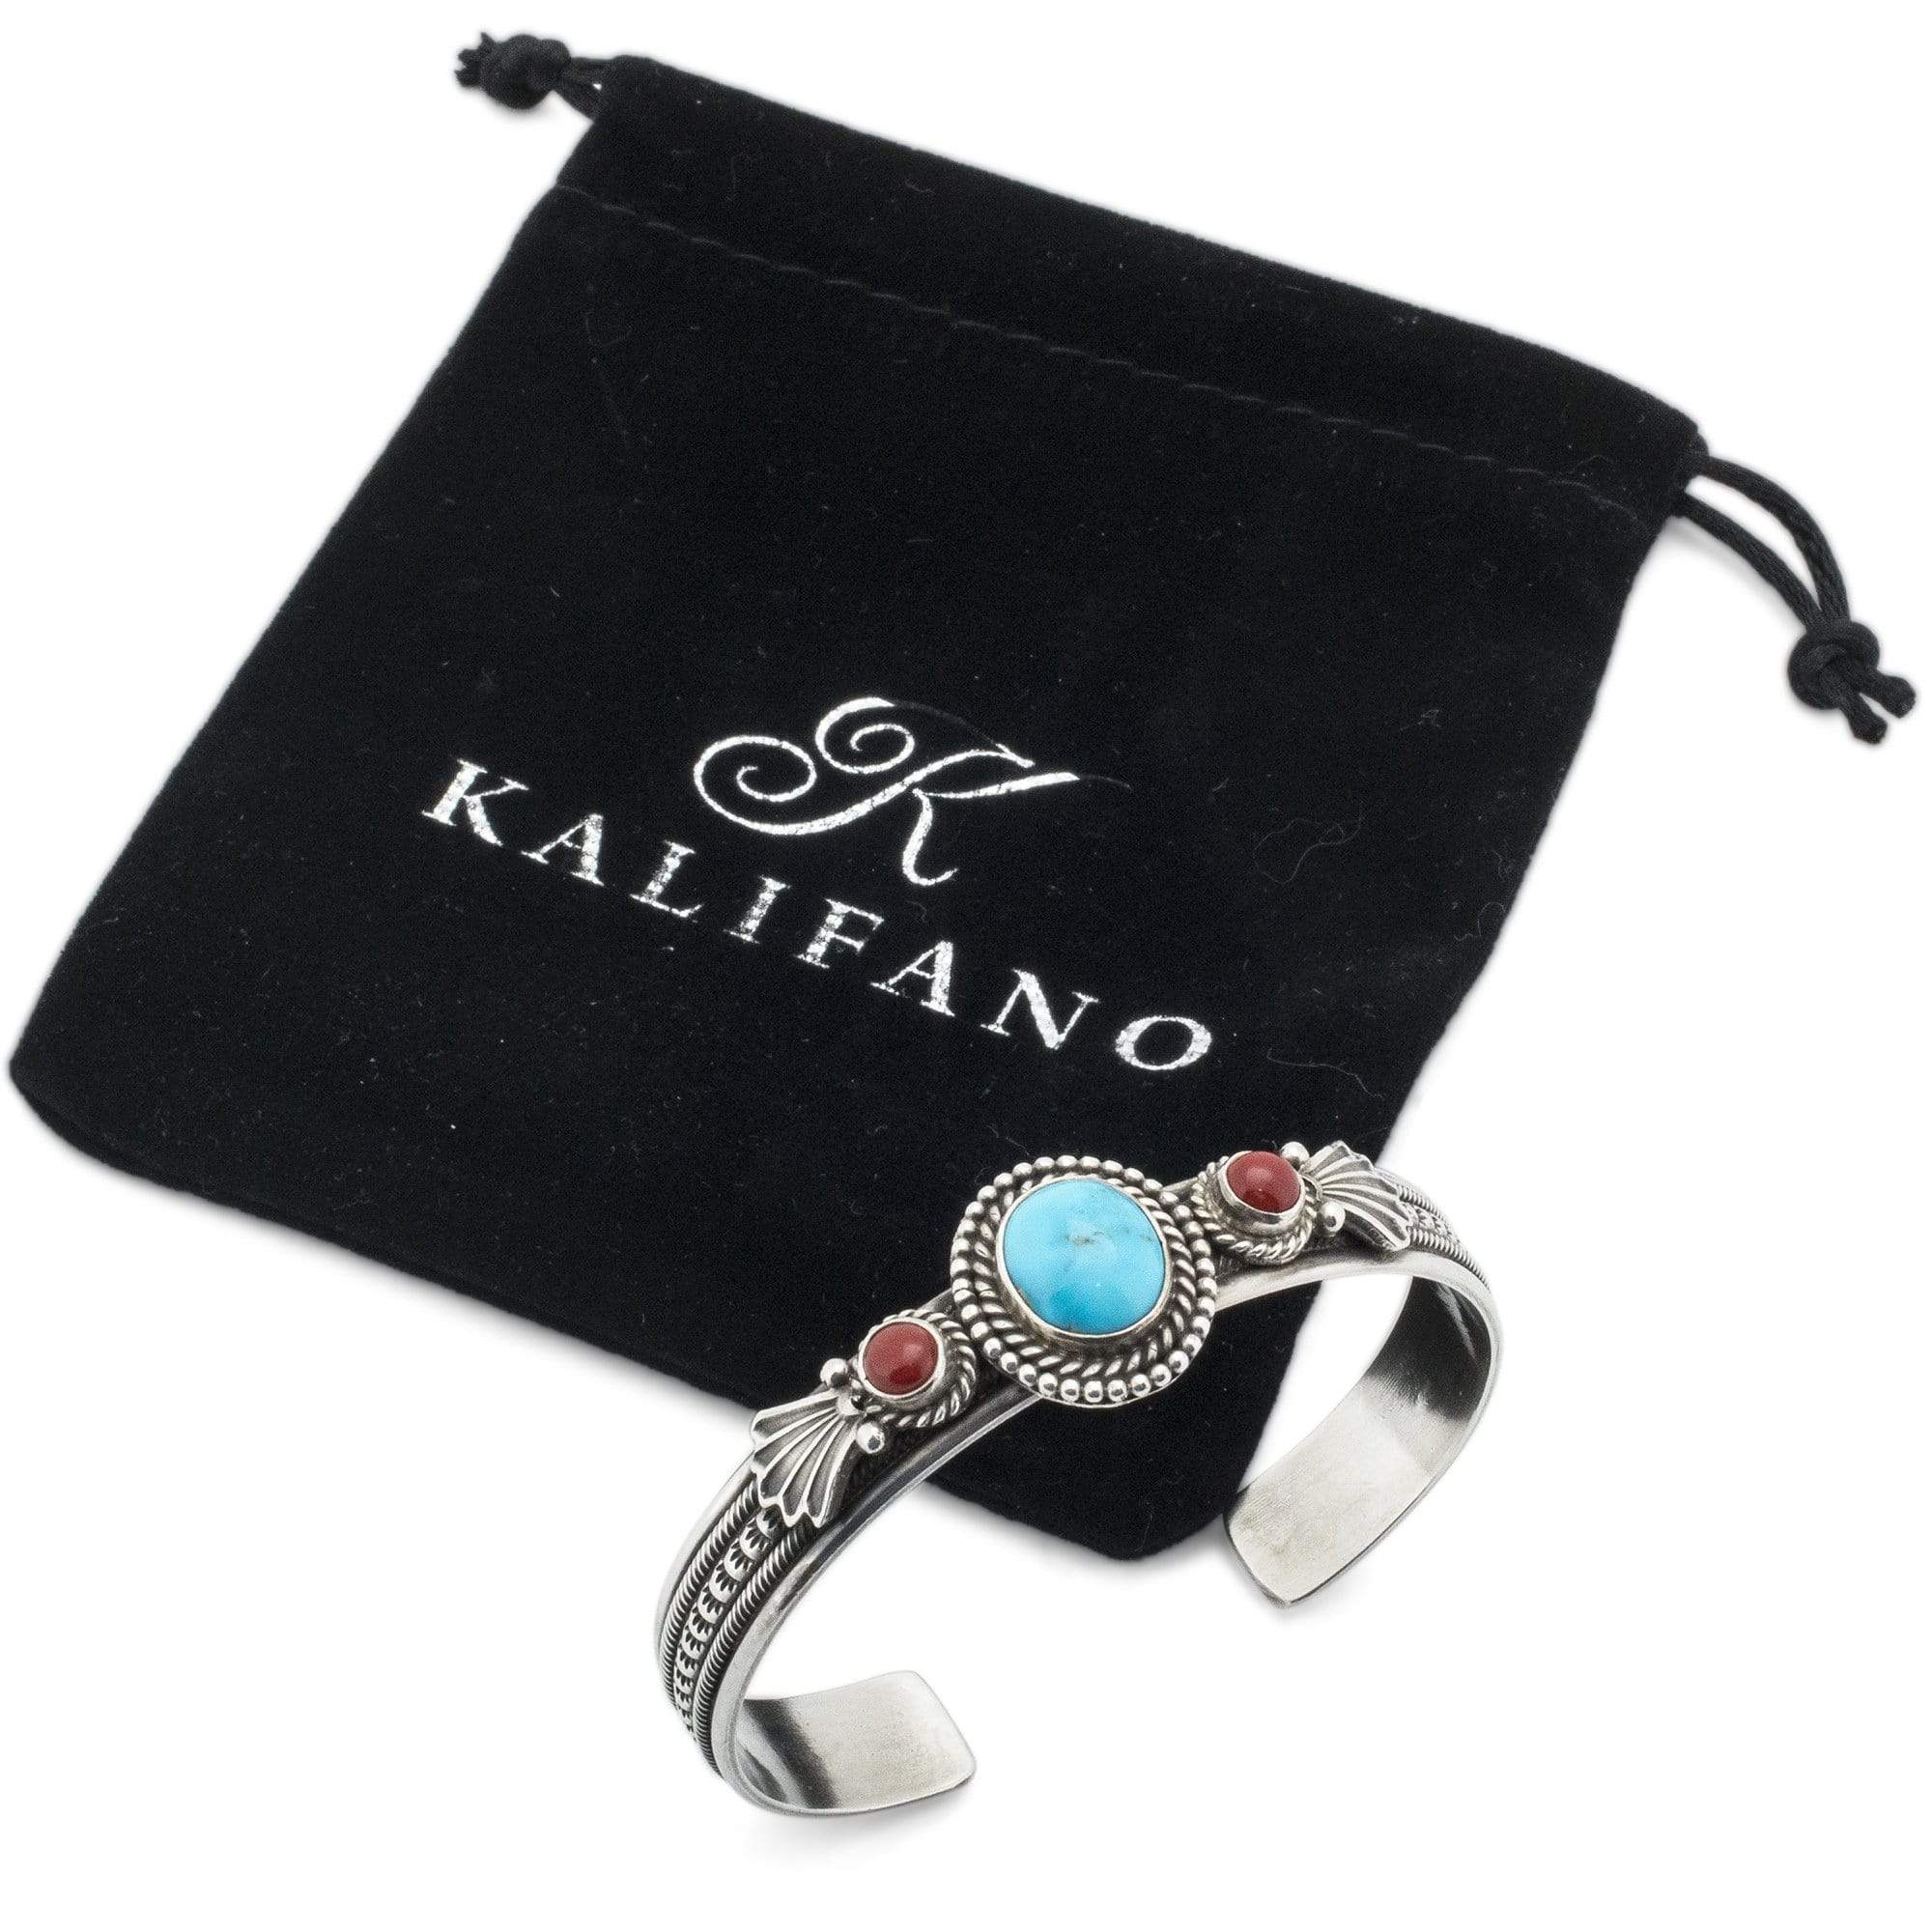 Kalifano Native American Jewelry Navajo Kingman Turquoise and Coral USA Native American Made 925 Sterling Silver Cuff NAB1200.002